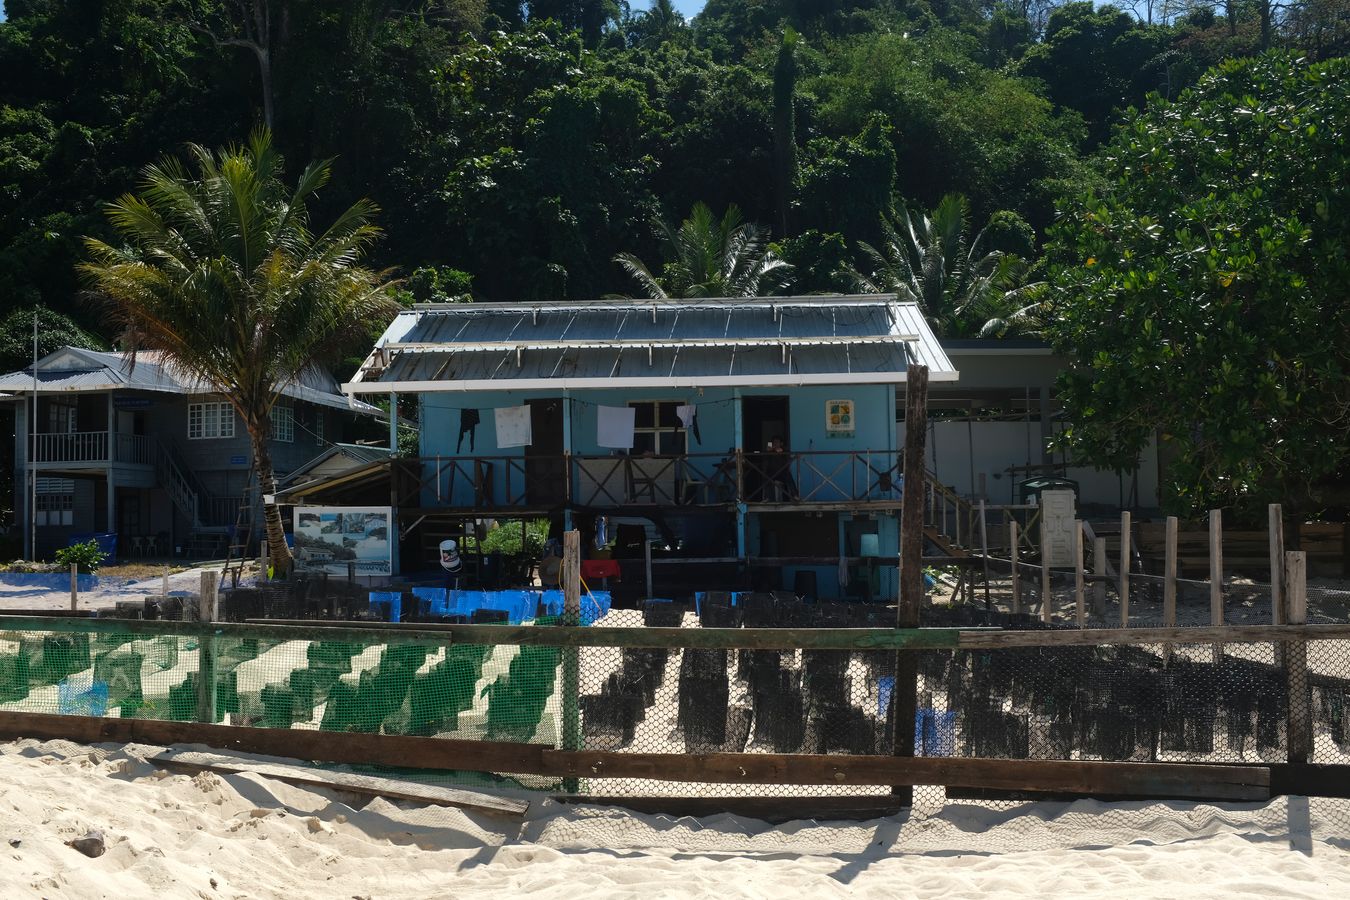 Front view of the sea turtle hatchery and the rangers house.